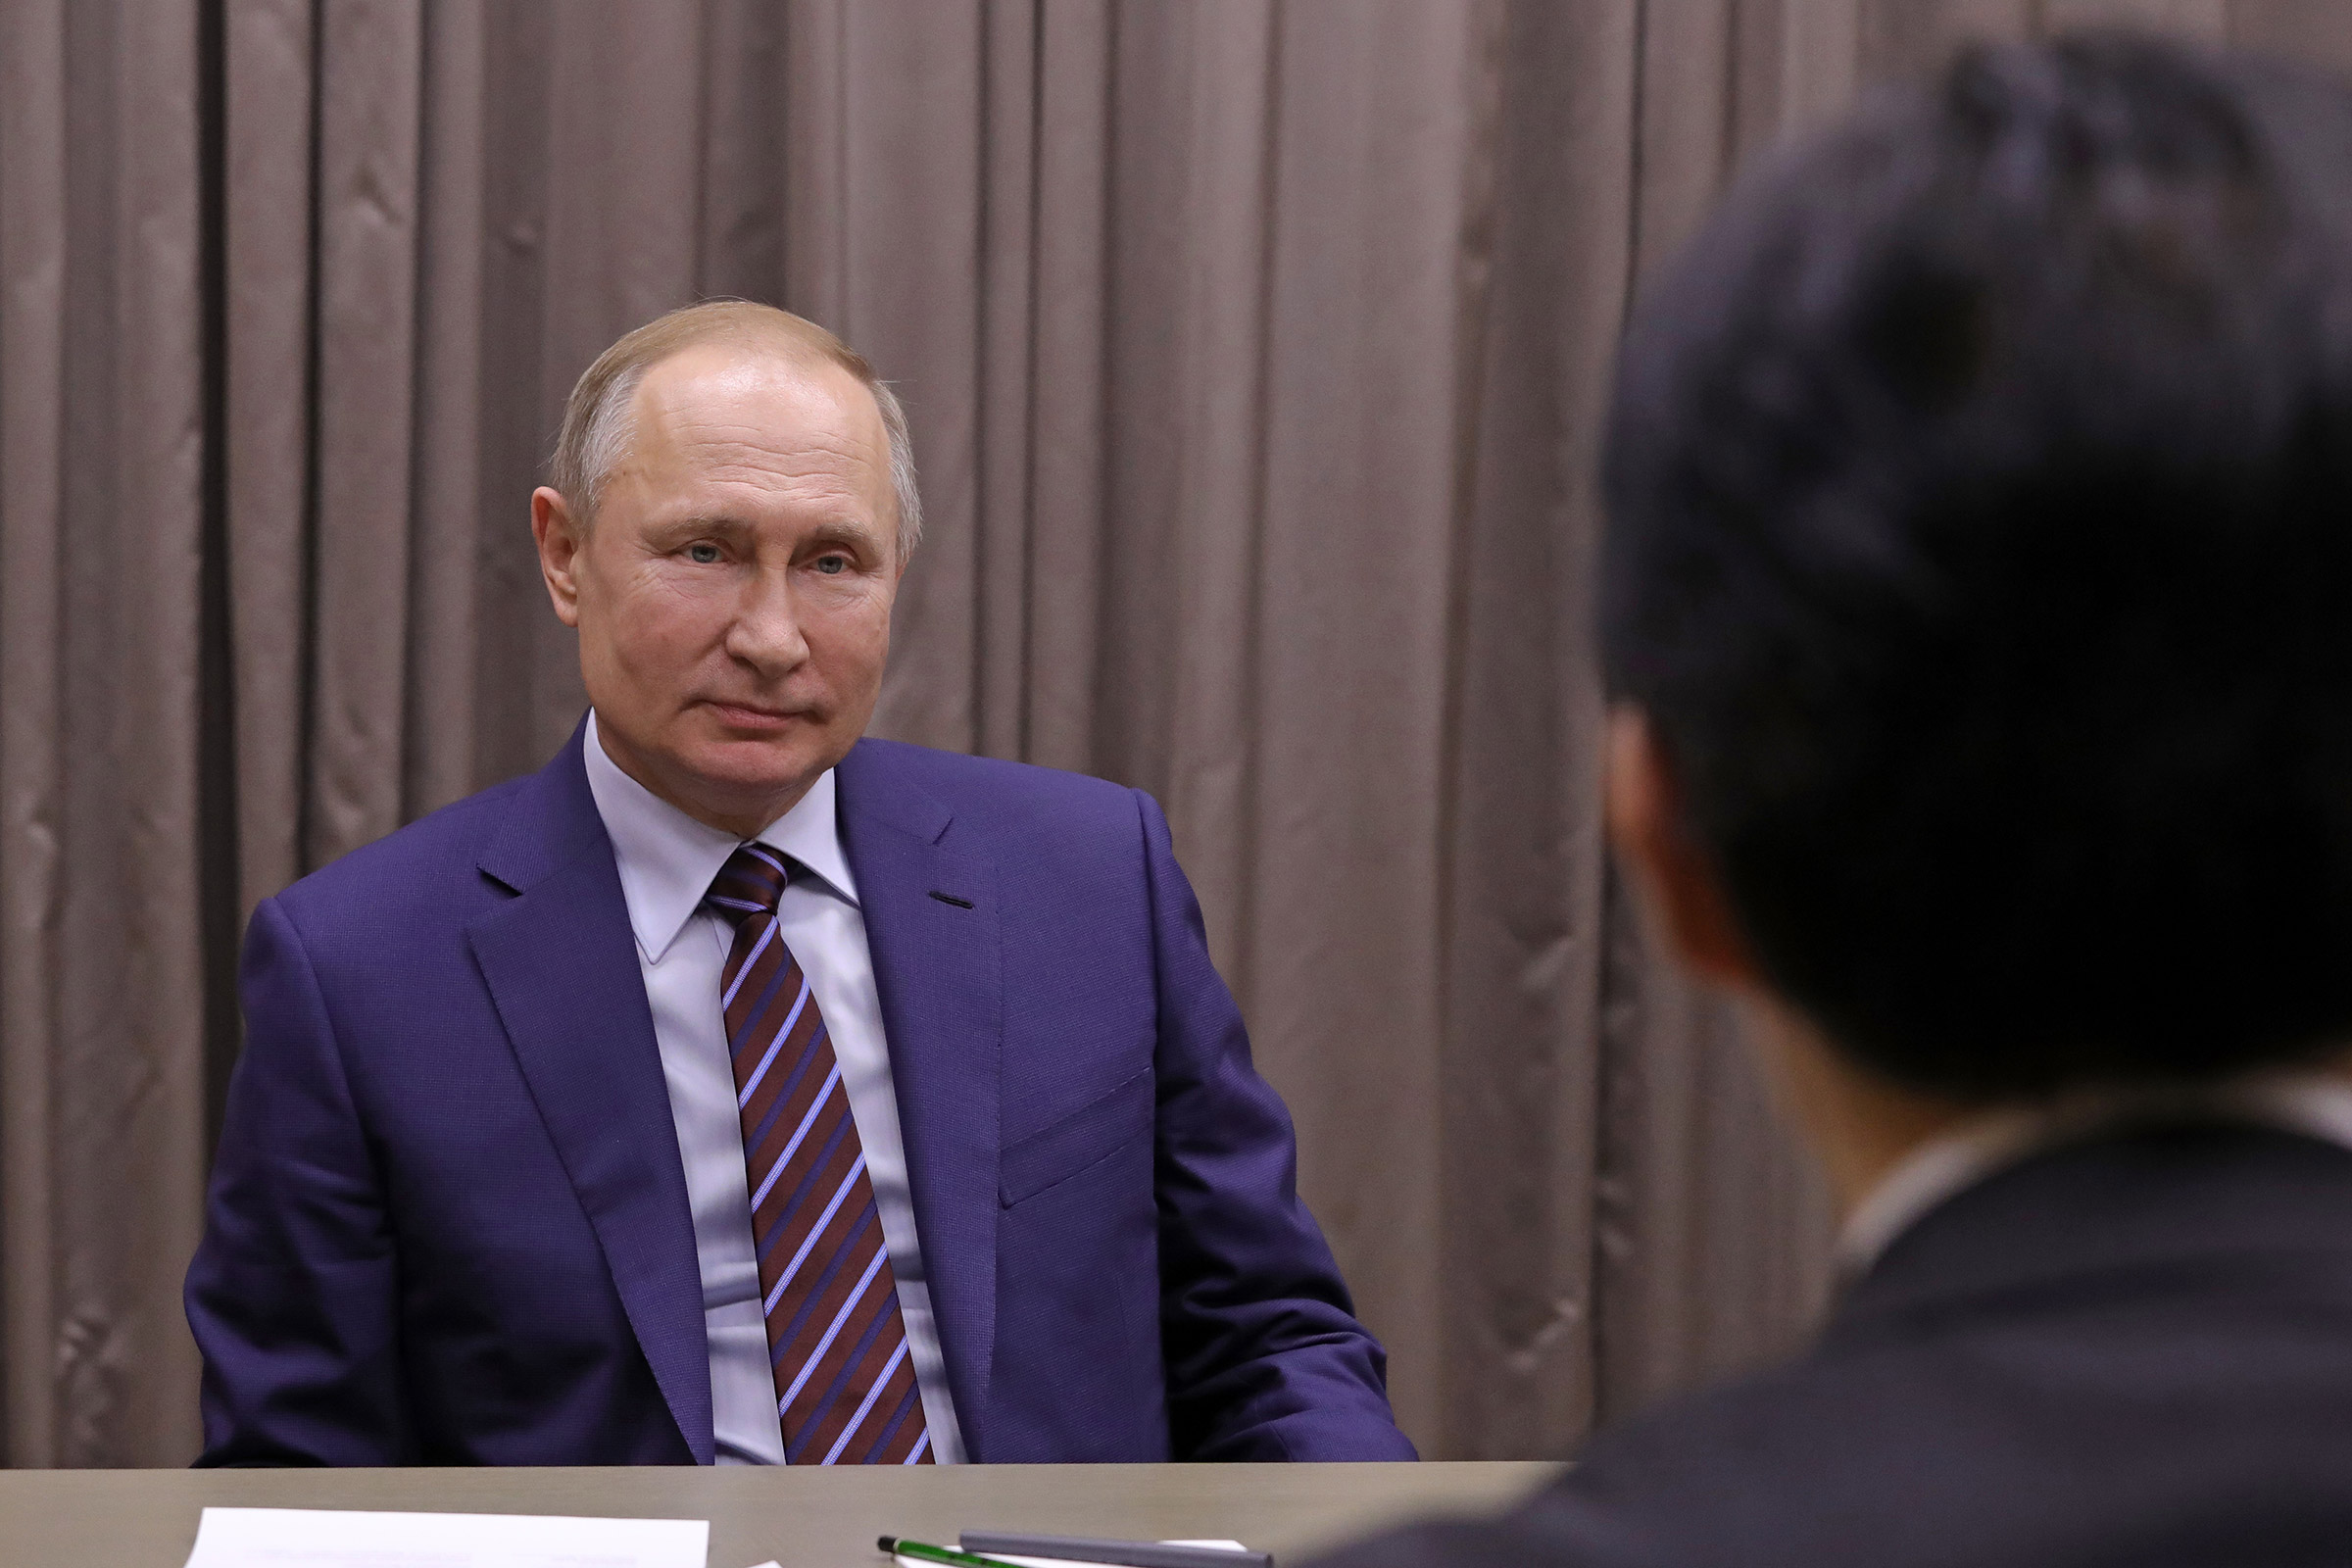 Russia's President Vladimir Putin during a meeting with Shigeru Kitamura, Secretary-General of the Japanese National Security Council on Jan. 16, 2020. (Mikhail Klimentyev—TASS/Getty Images)